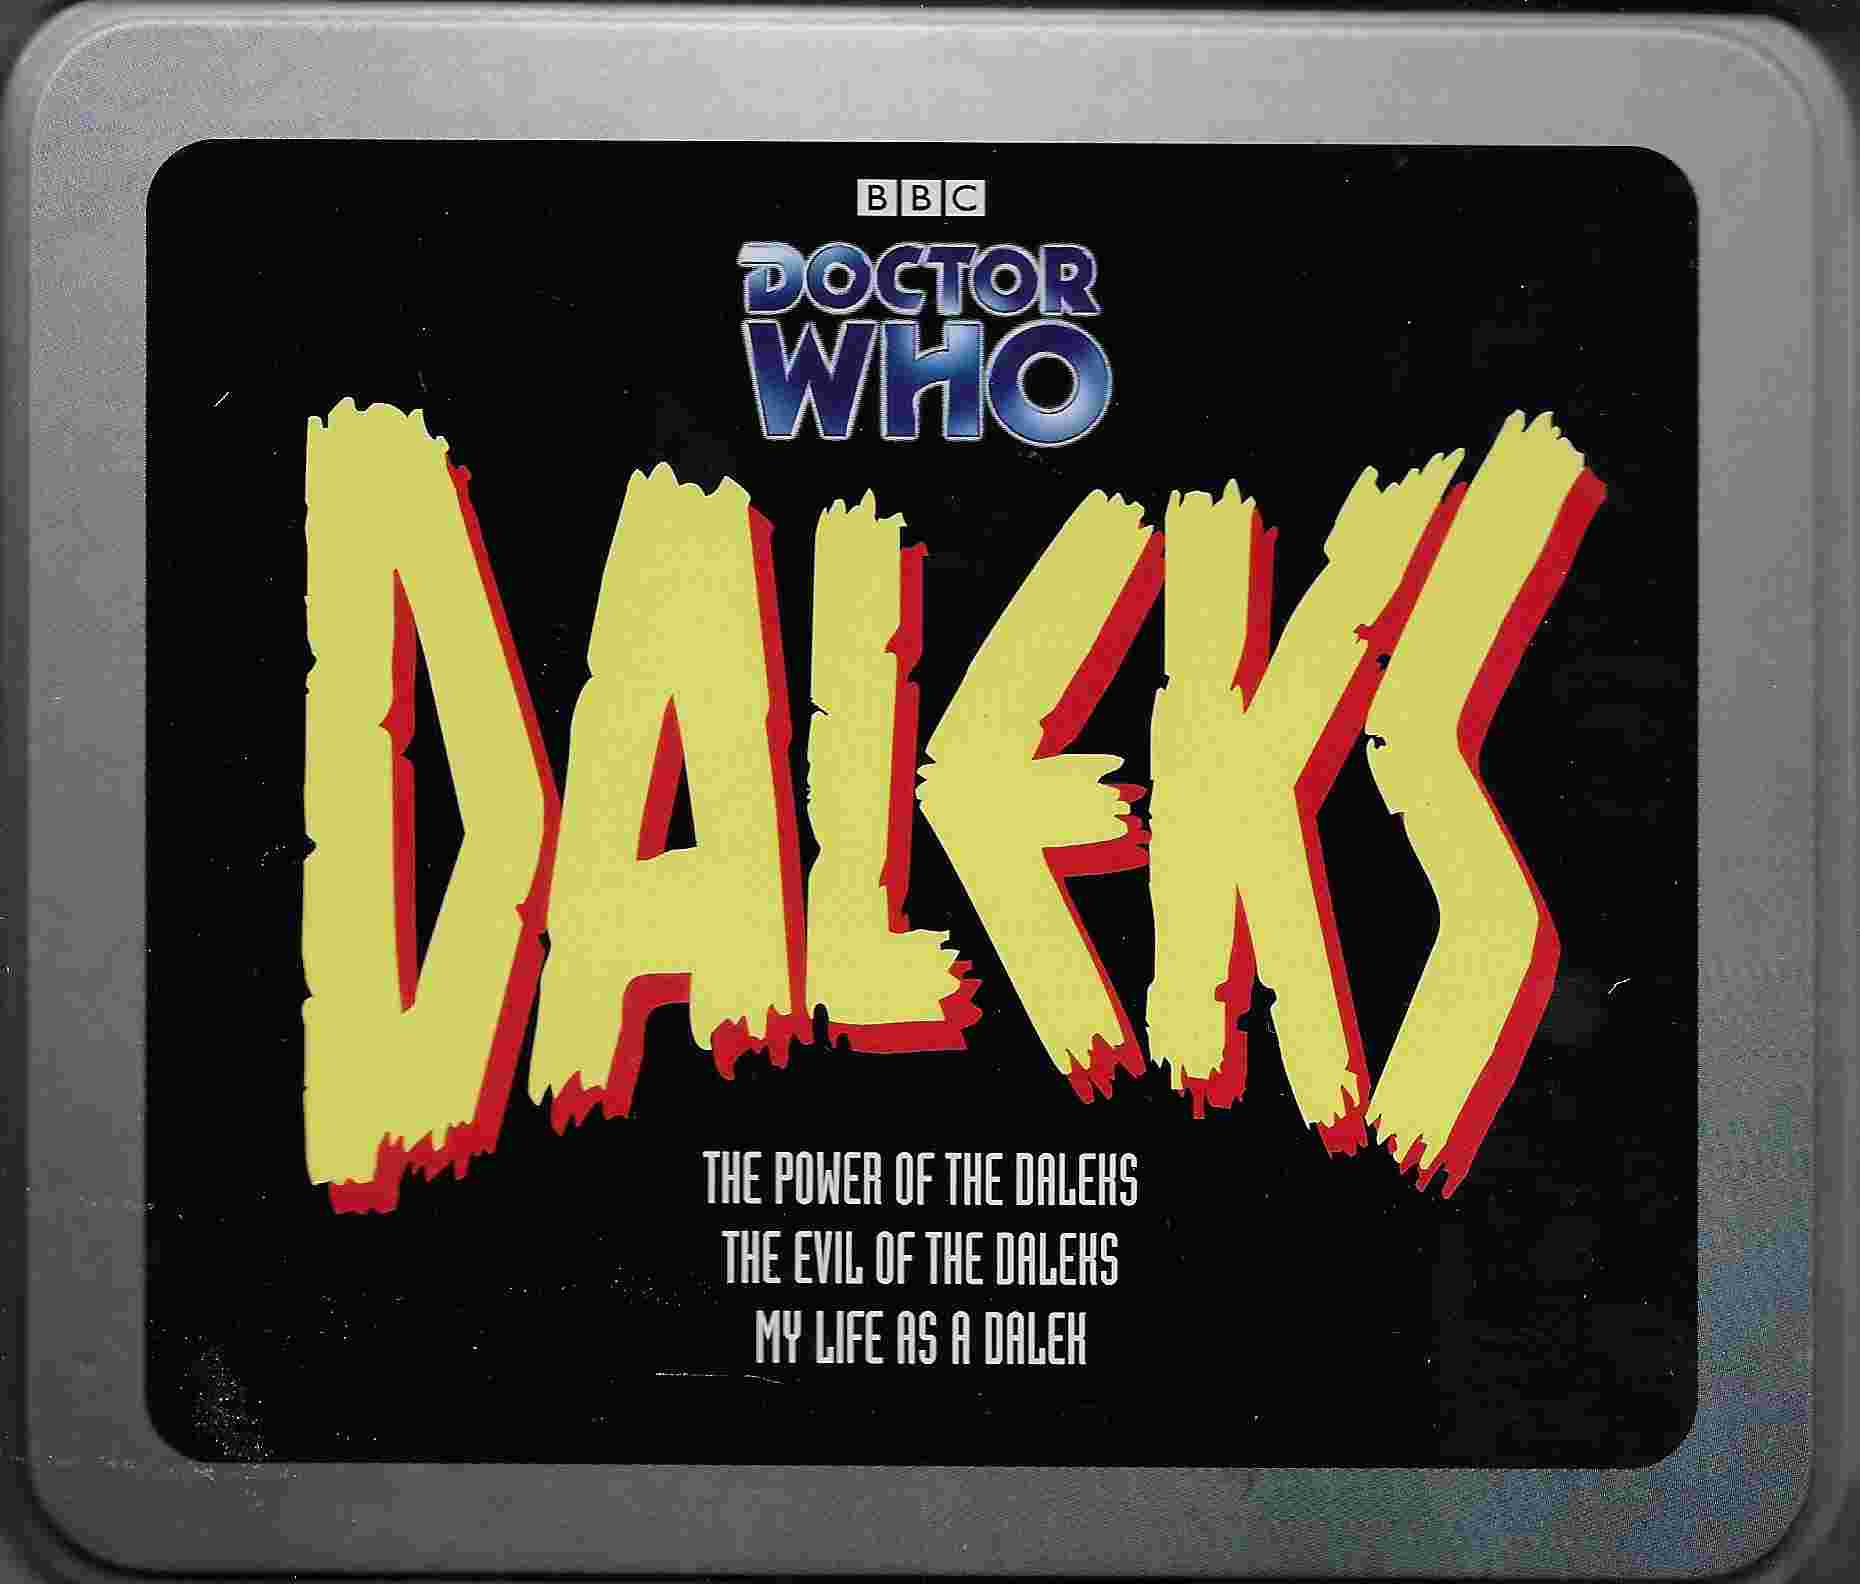 Picture of ISBN 0-563-49476-X Doctor Who - Daleks by artist David Whitaker / Mark Gatiss from the BBC cds - Records and Tapes library